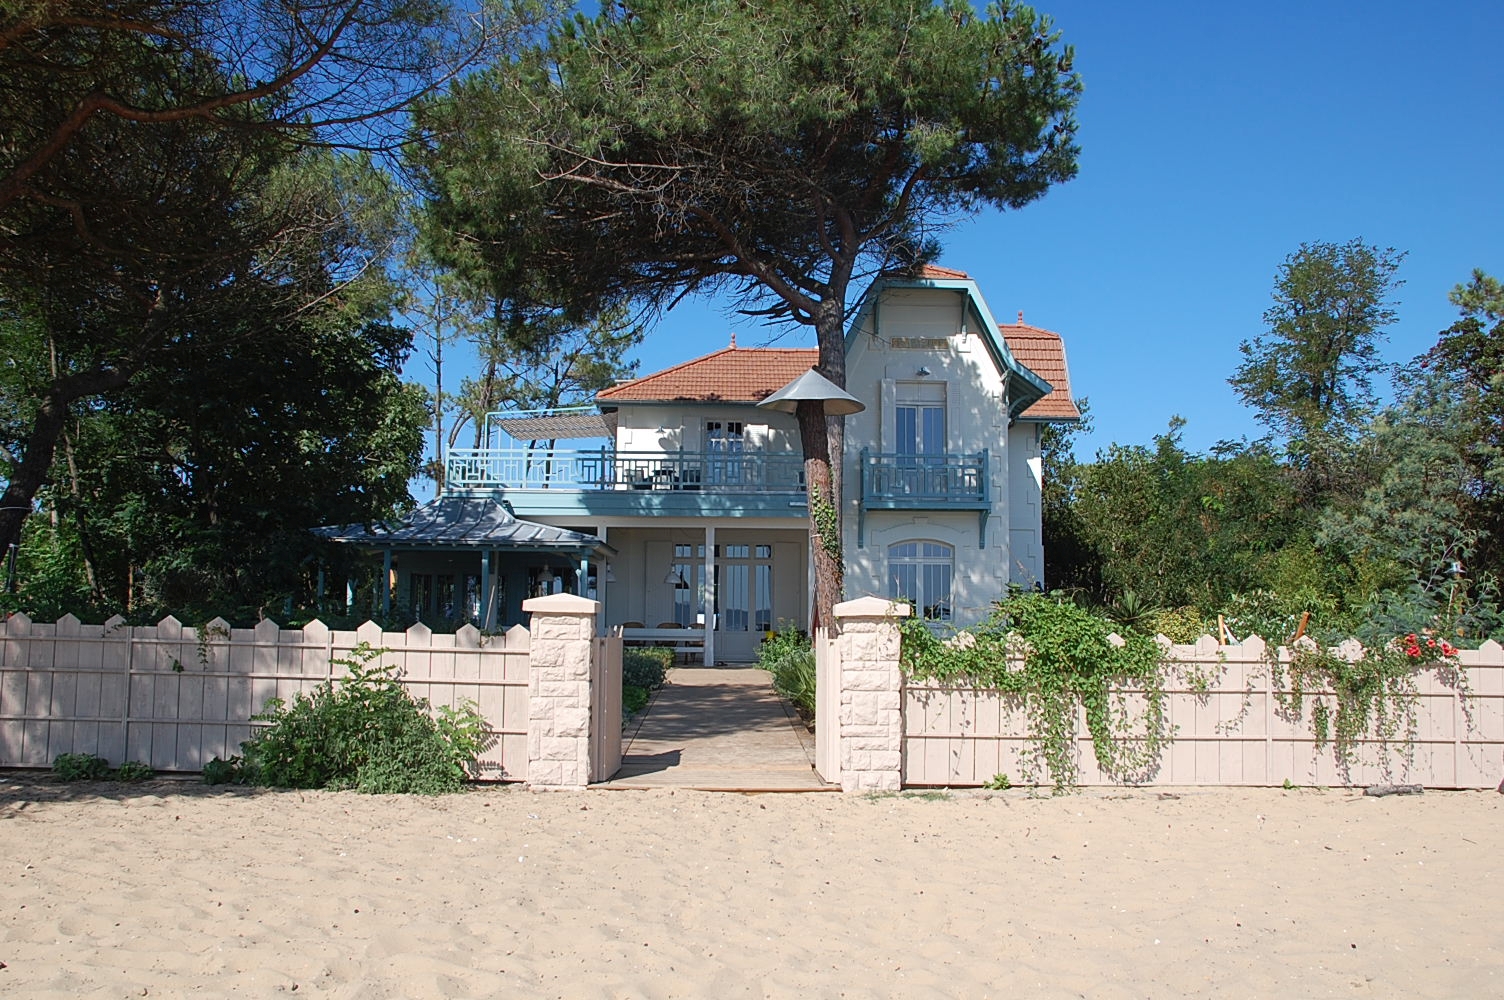 Facade of Villa Isabelle, South West France, seen from the beach